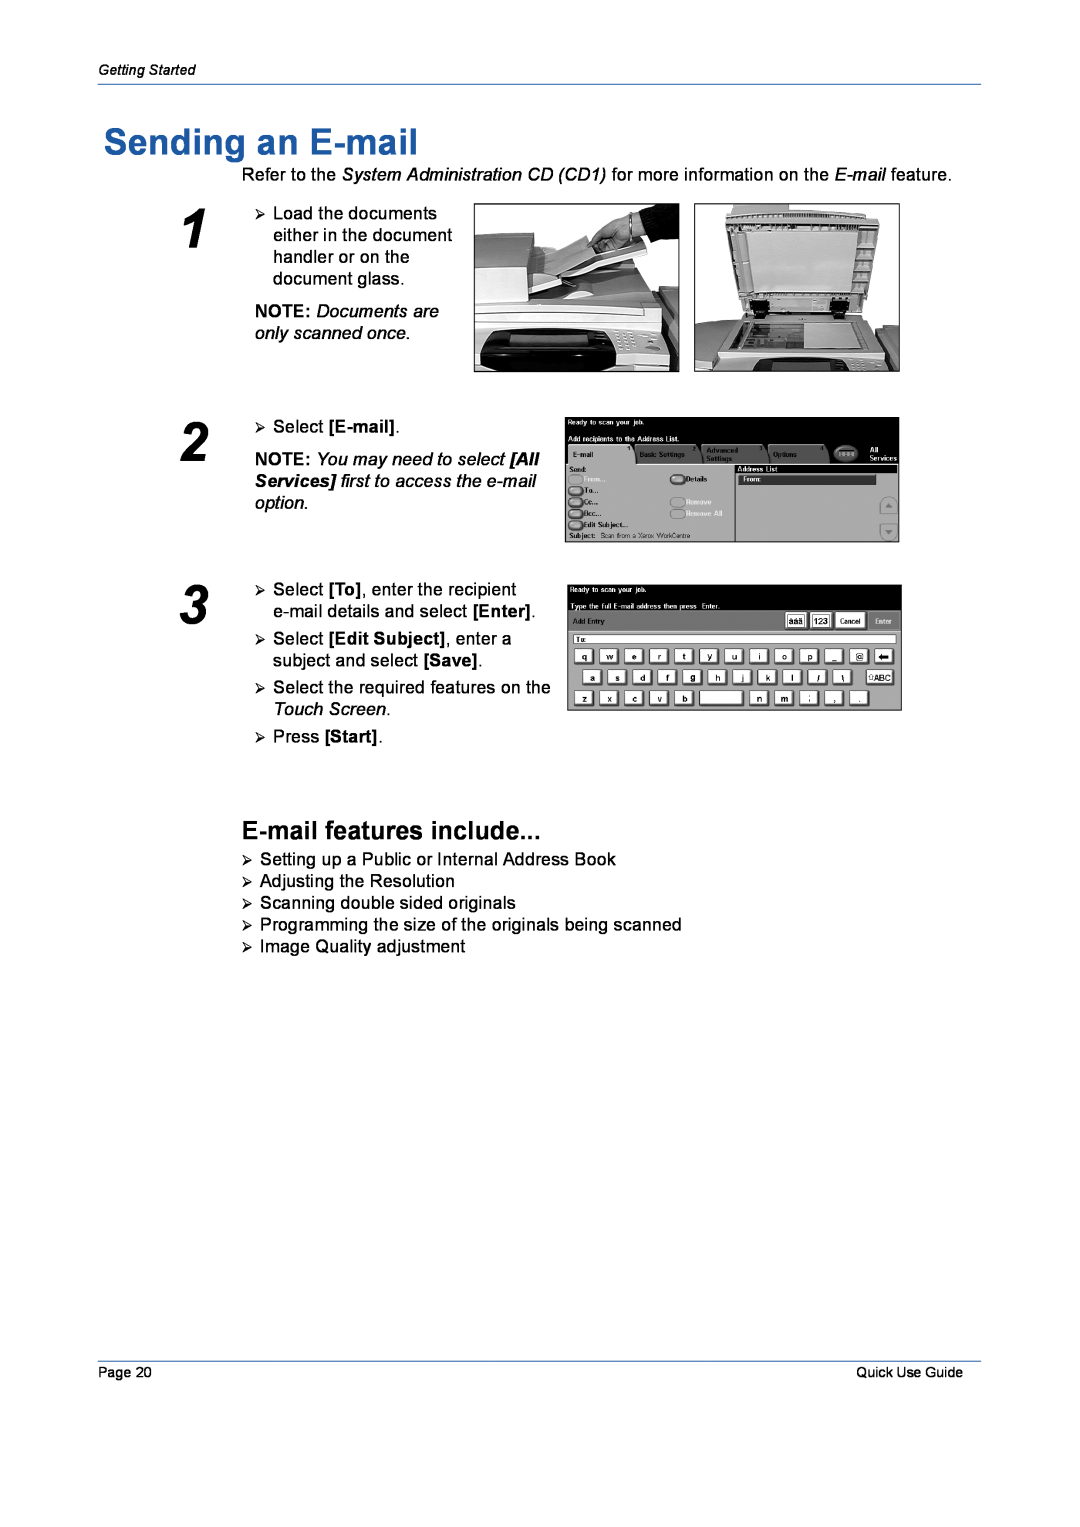 Xerox 5632 manual Sending an E-mail, E-mail features include 